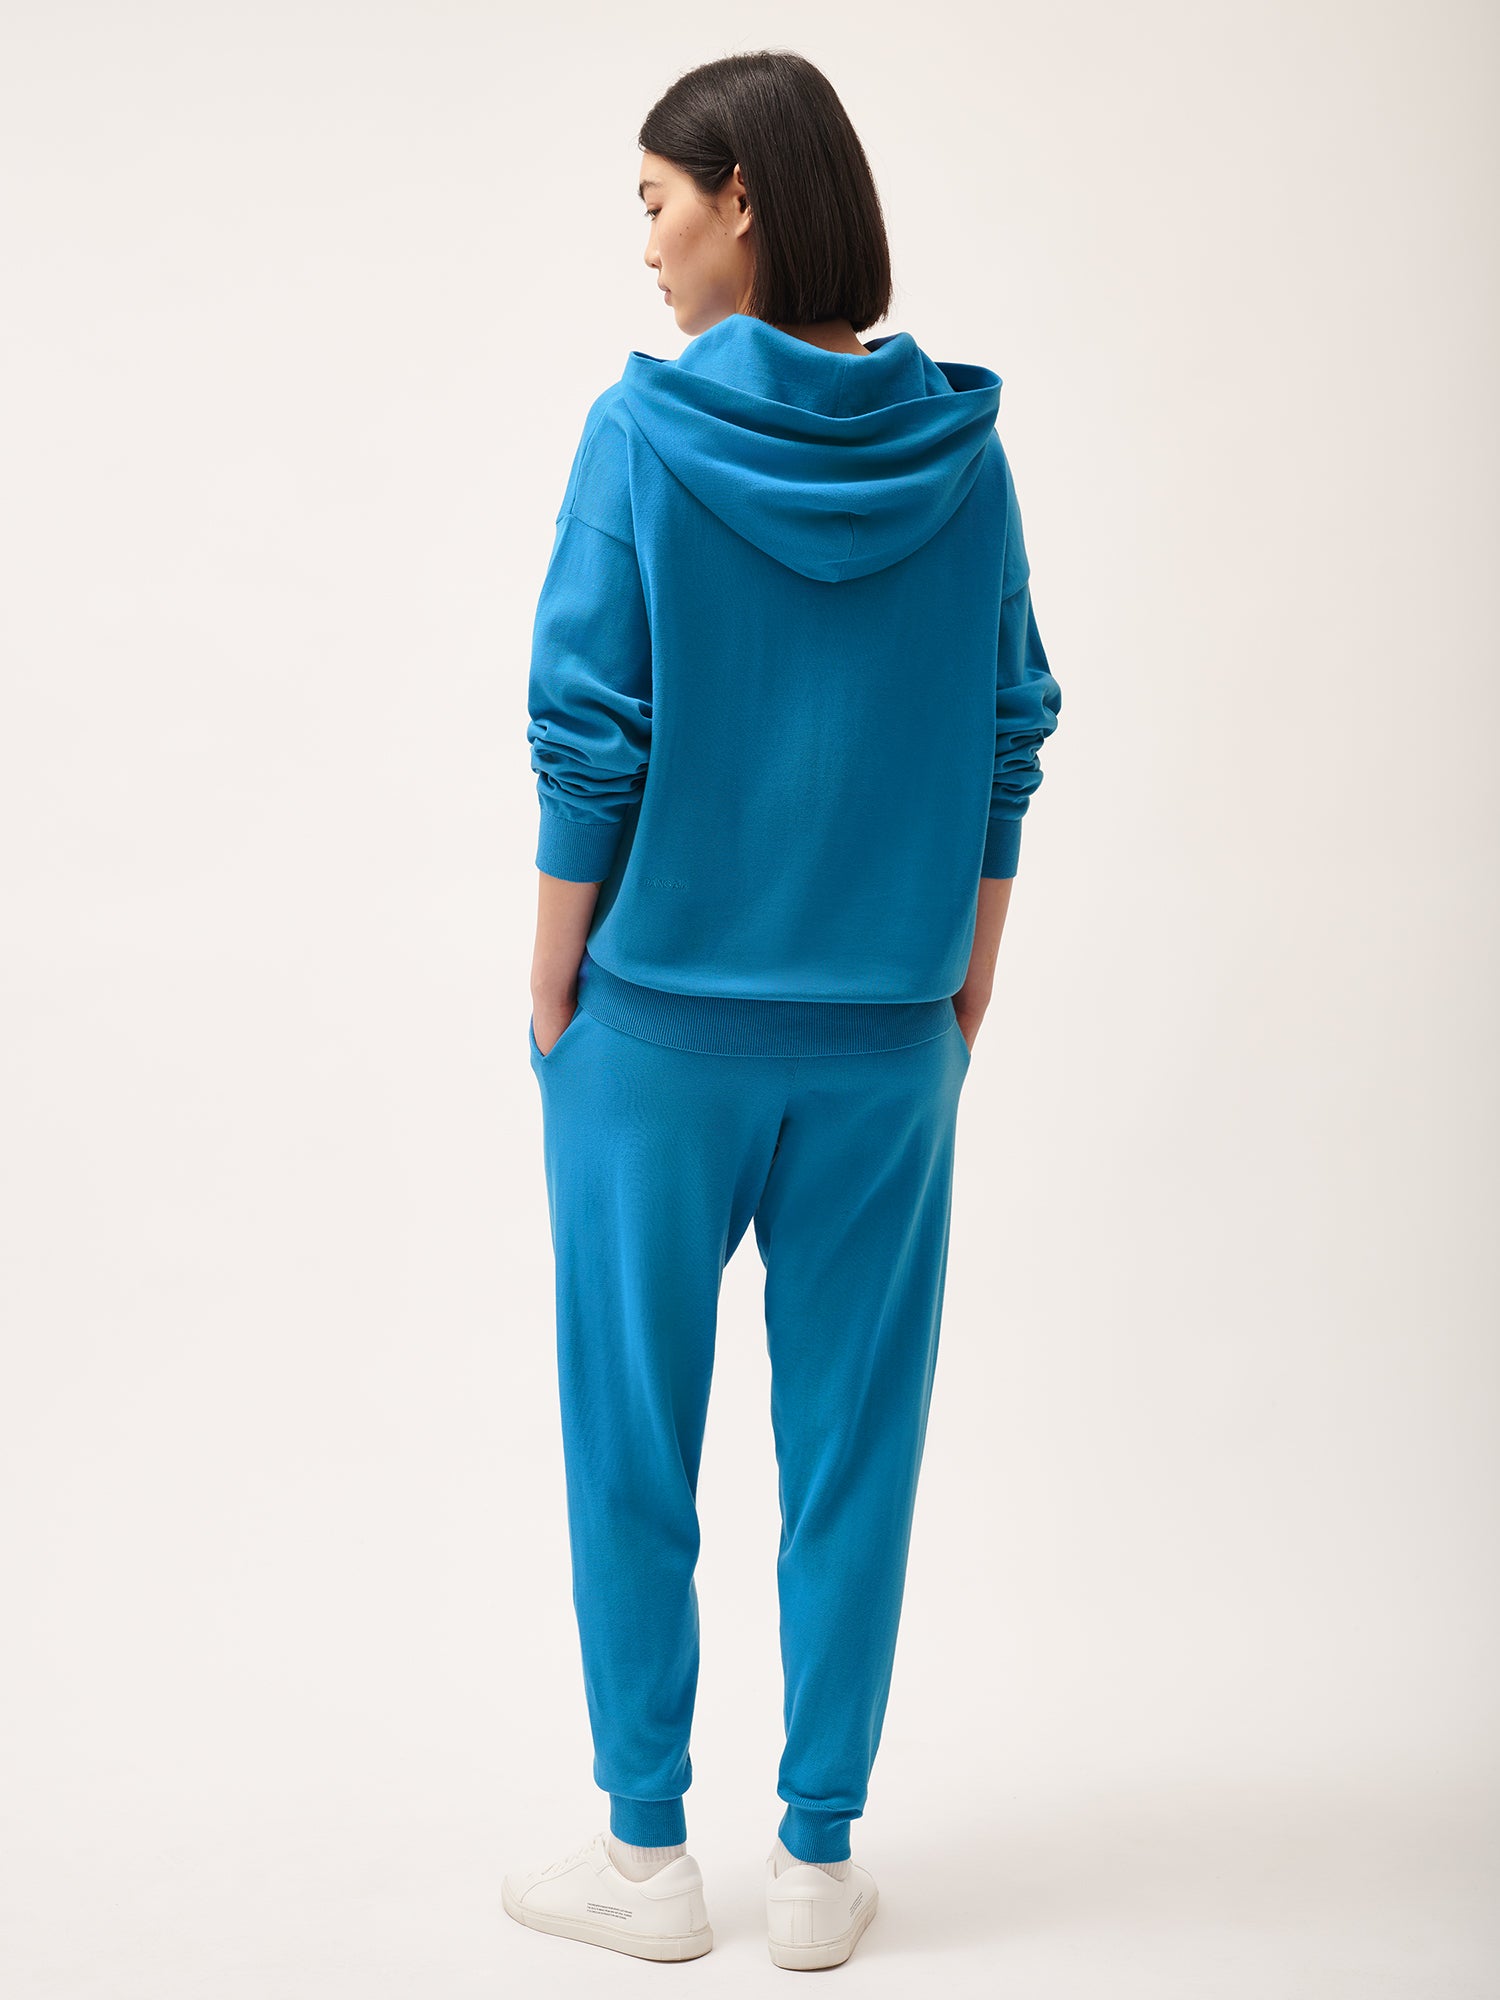 DNA_Knitted_Track_Pants_Geyser_Blue_female-2